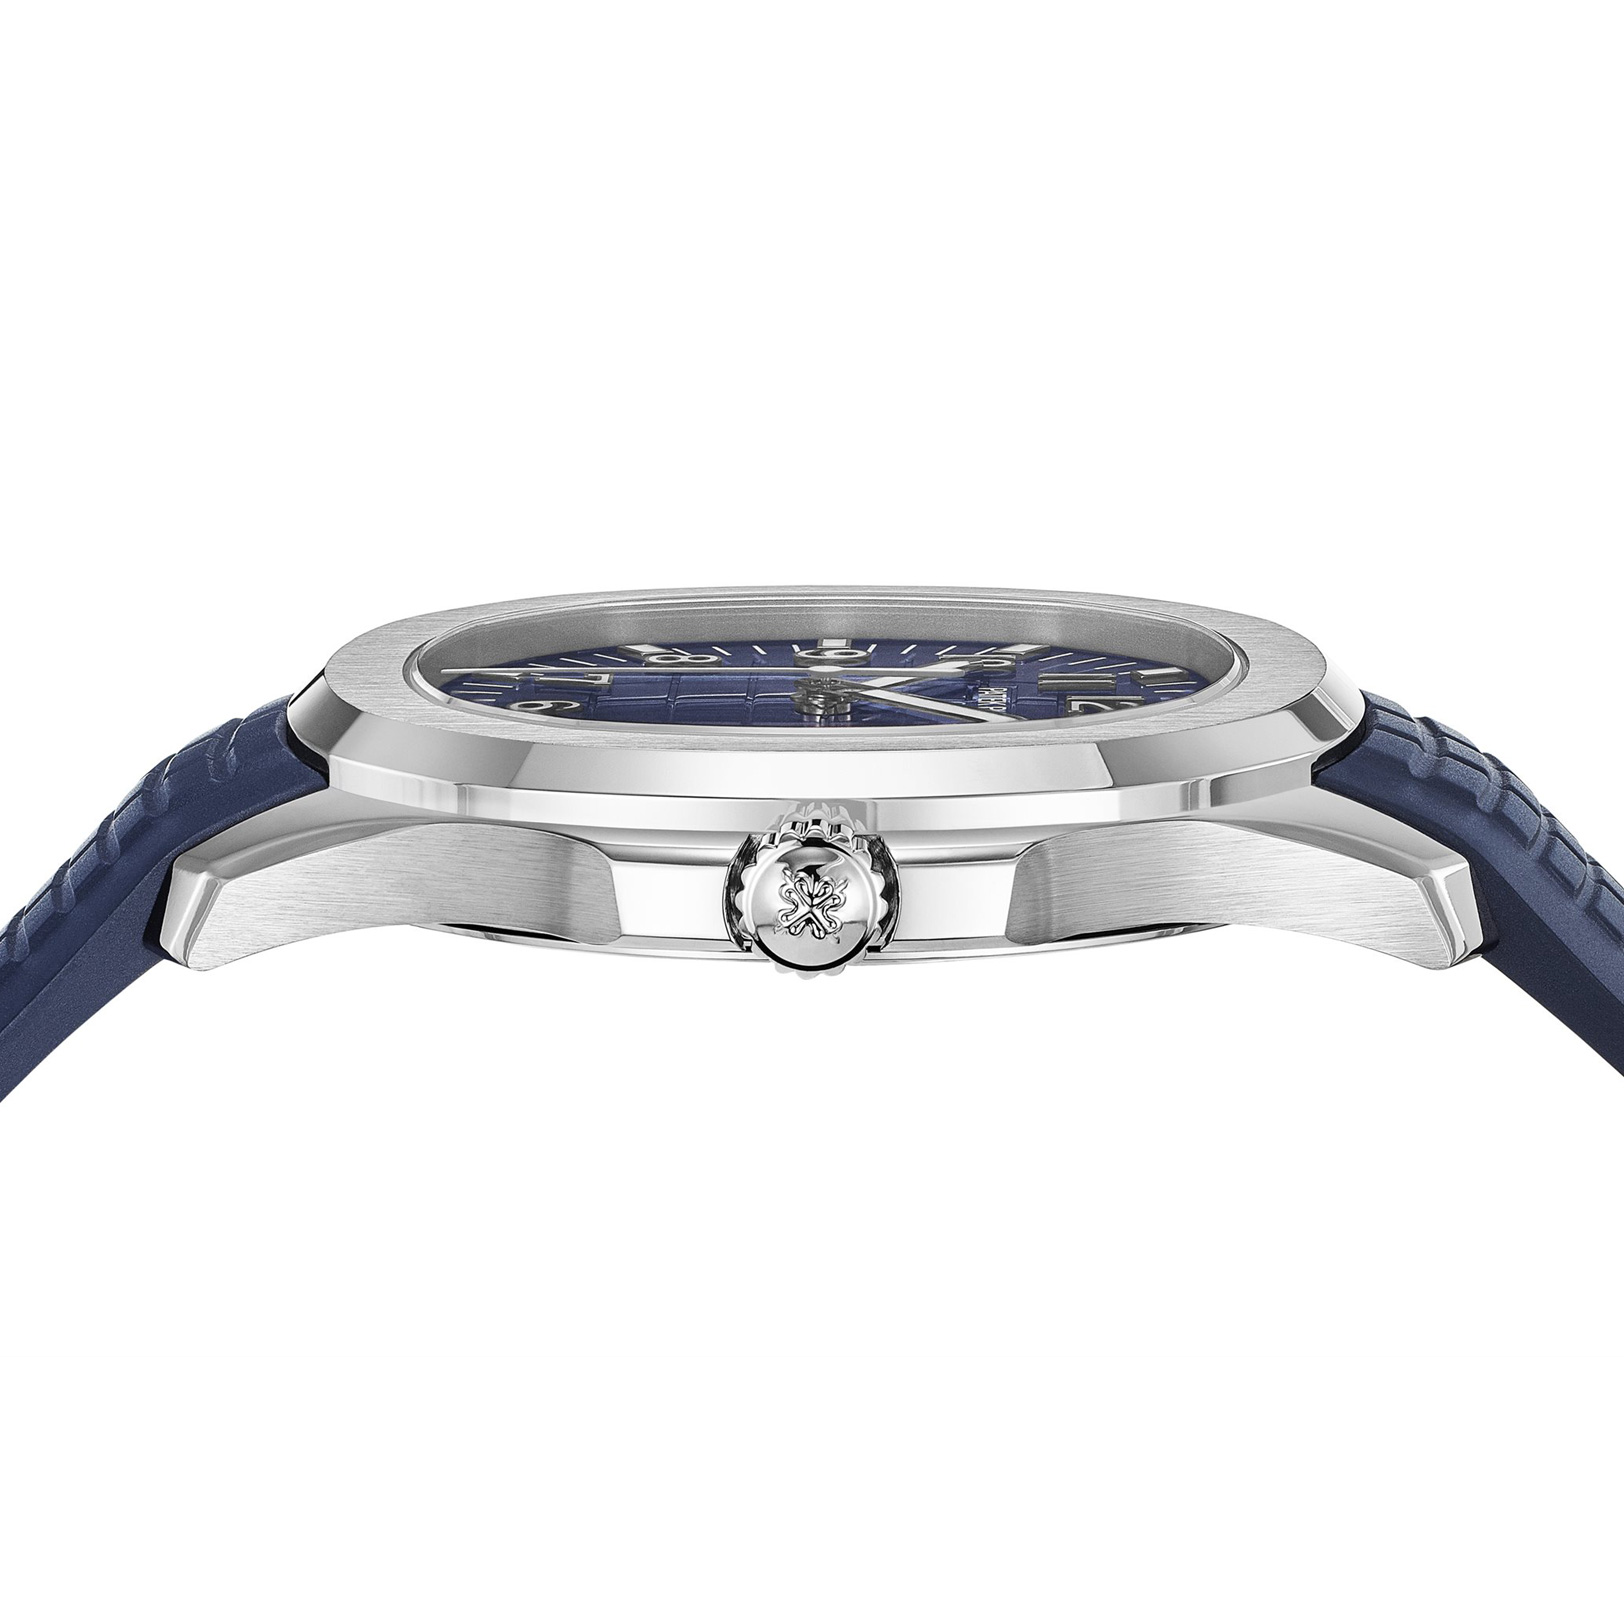 Aquanaut Blue Dial & Strap White Gold gallery 8